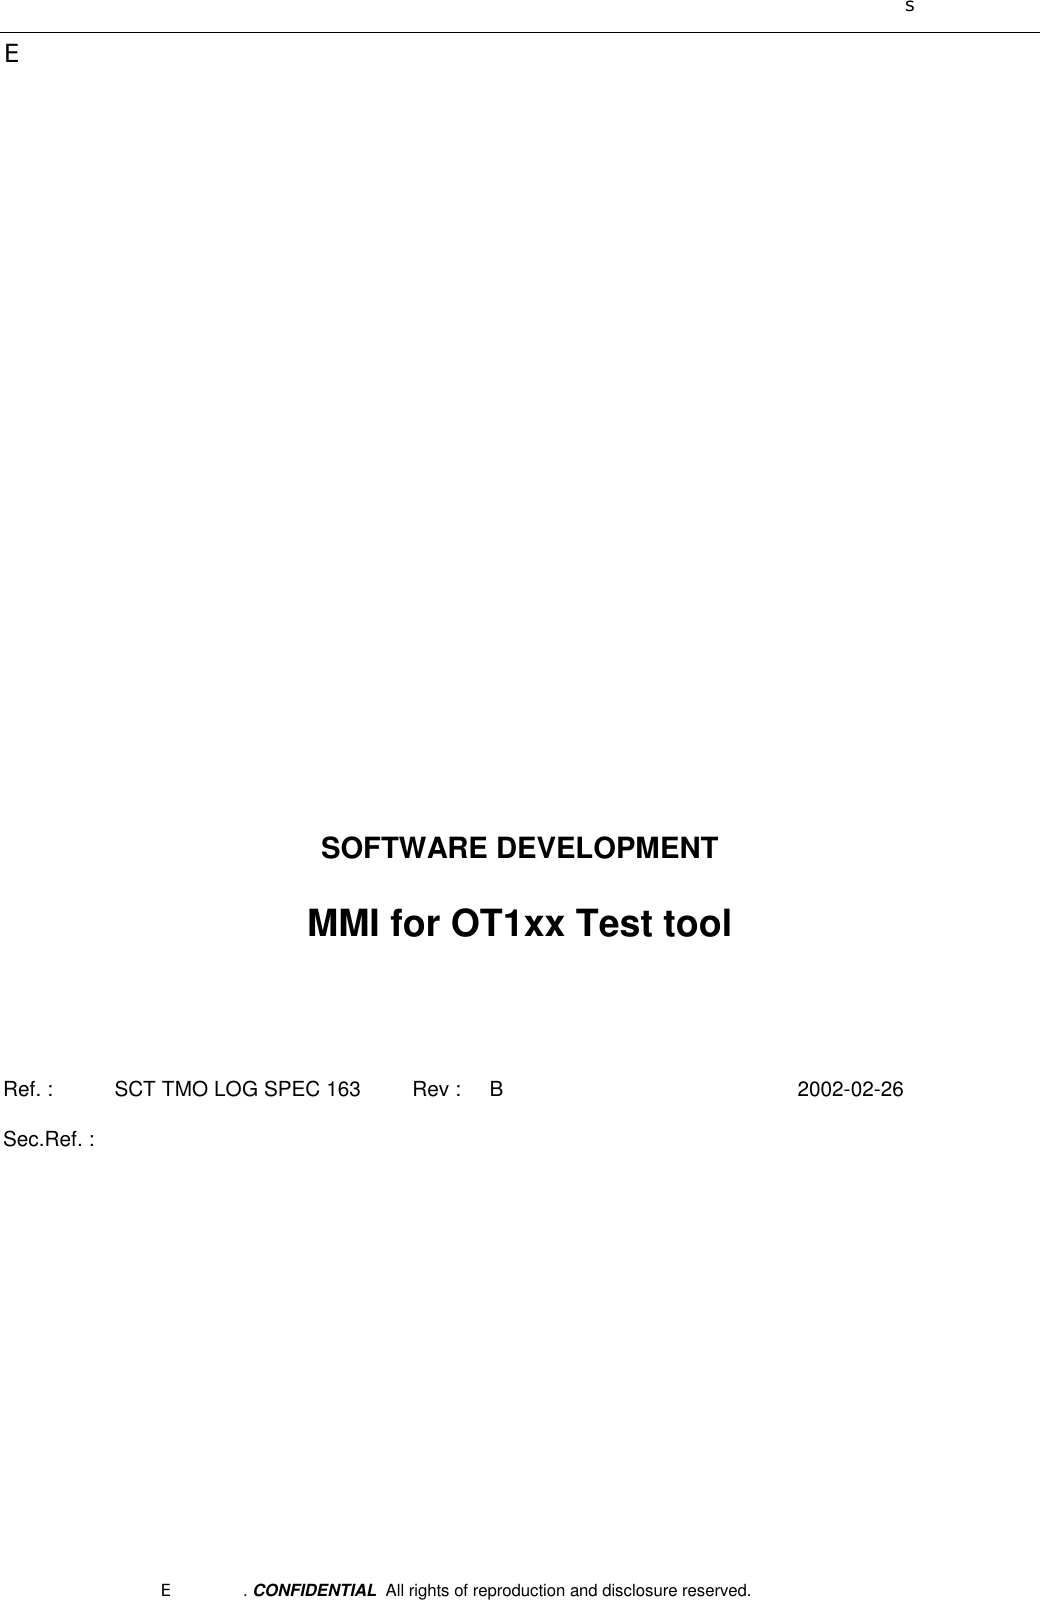 sEE. CONFIDENTIAL  All rights of reproduction and disclosure reserved.SOFTWARE DEVELOPMENTMMI for OT1xx Test toolRef. : SCT TMO LOG SPEC 163 Rev : B 2002-02-26Sec.Ref. :